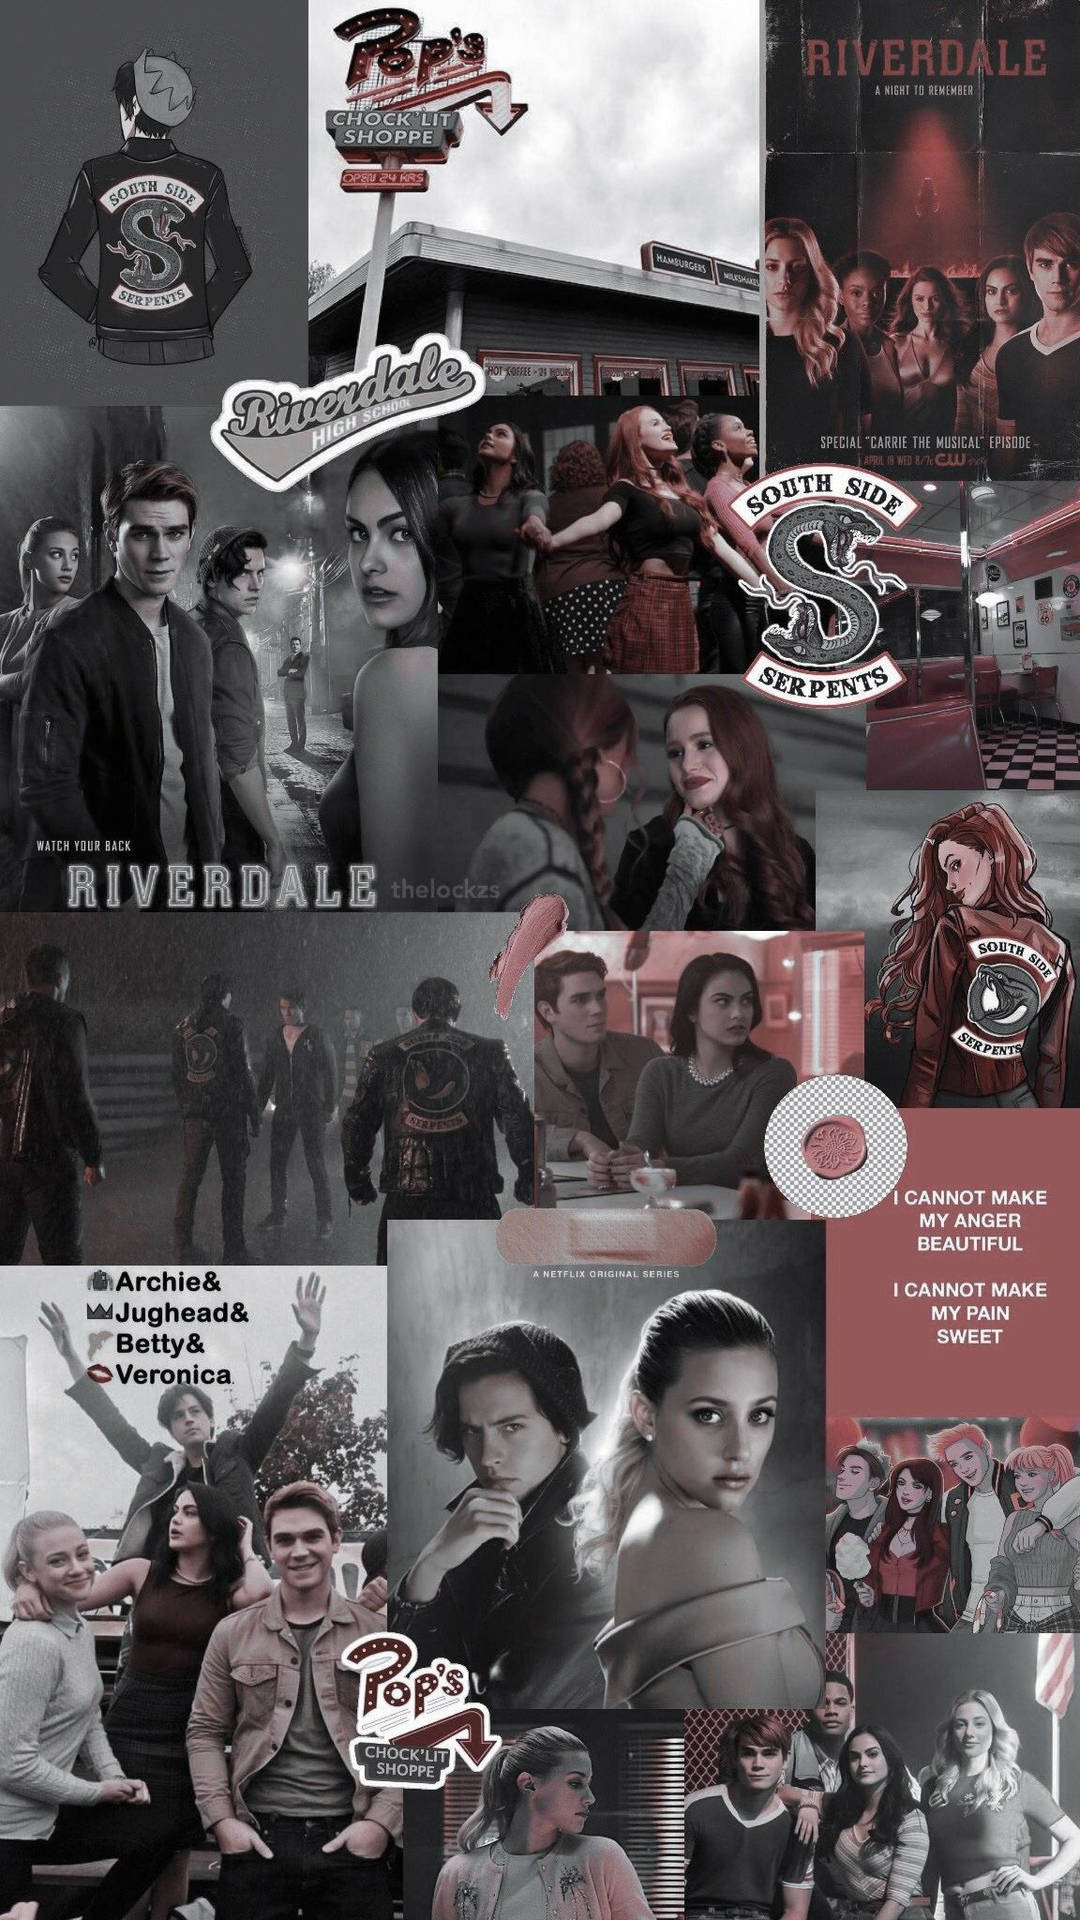 Aesthetic Riverdale wallpaper I made for my phone! Let me know if you'd like me to make more! - Riverdale